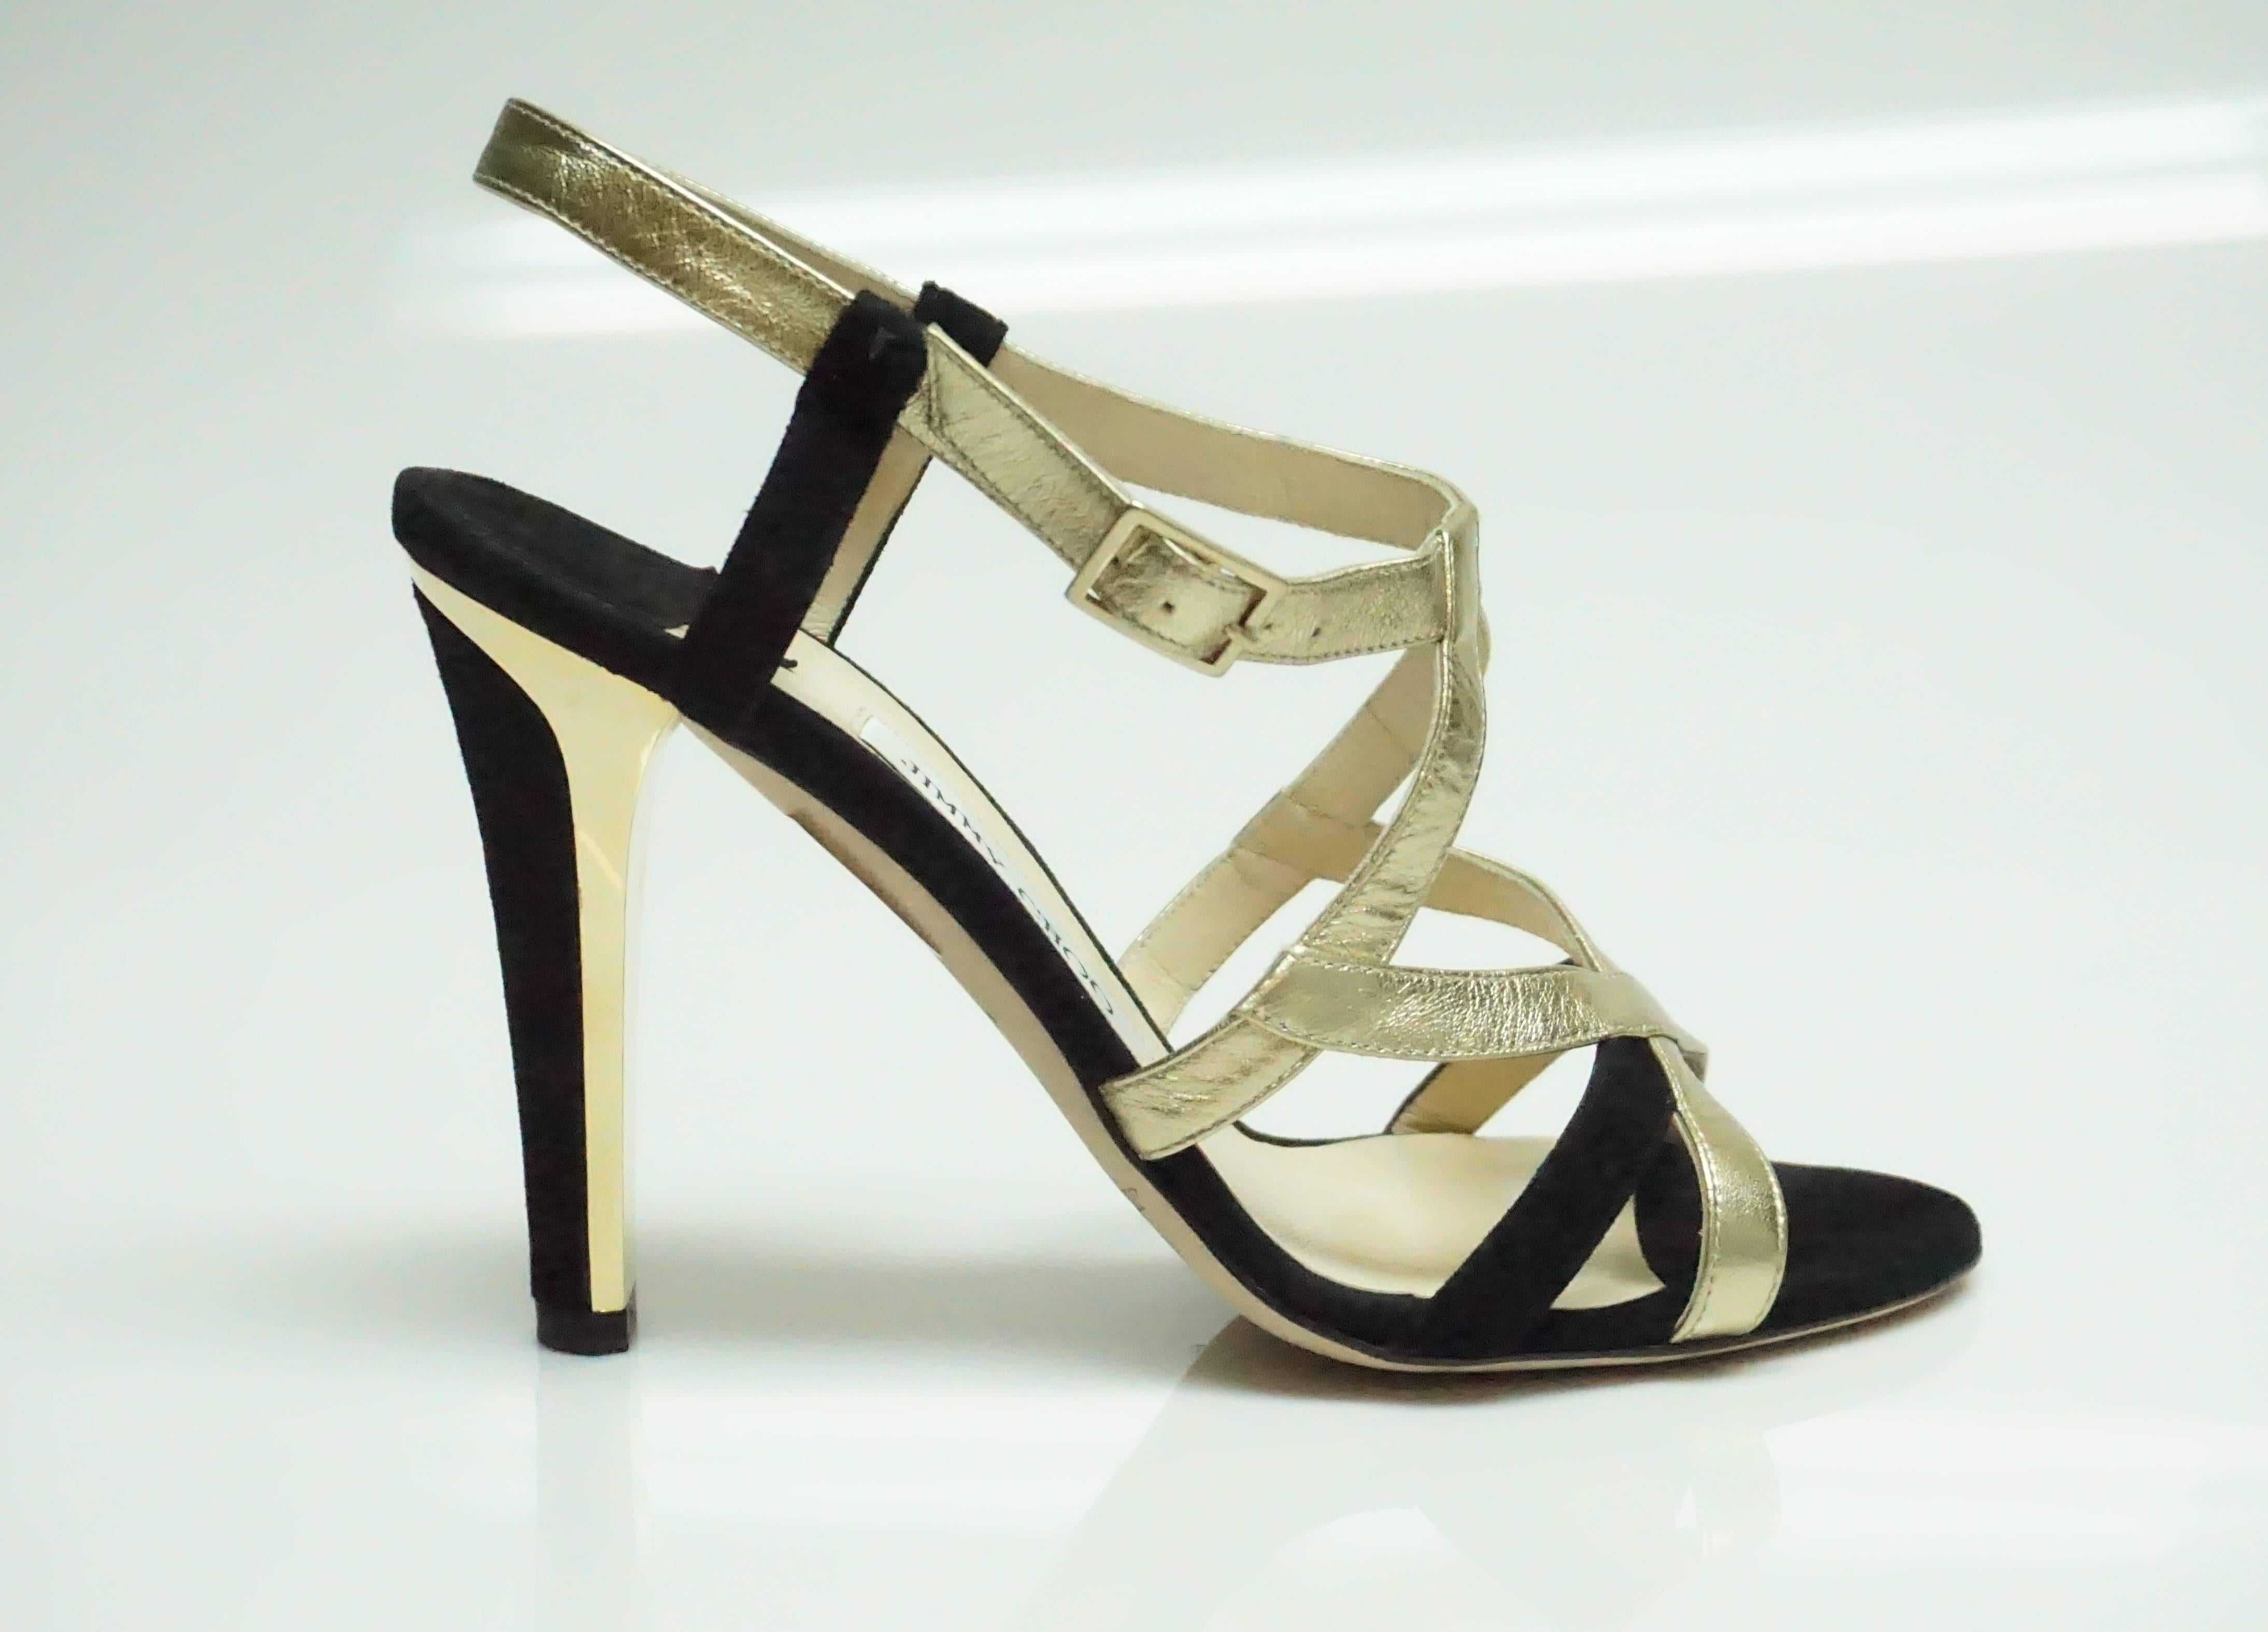 Jimmy Choo Black Suede and Gold Metallic Leather Strappy Heel - 39  These modern heels are in excellent condition and have a very sharp look to them. The Heel has a gold metal accent around the black suede. They have little to no wear on the inside